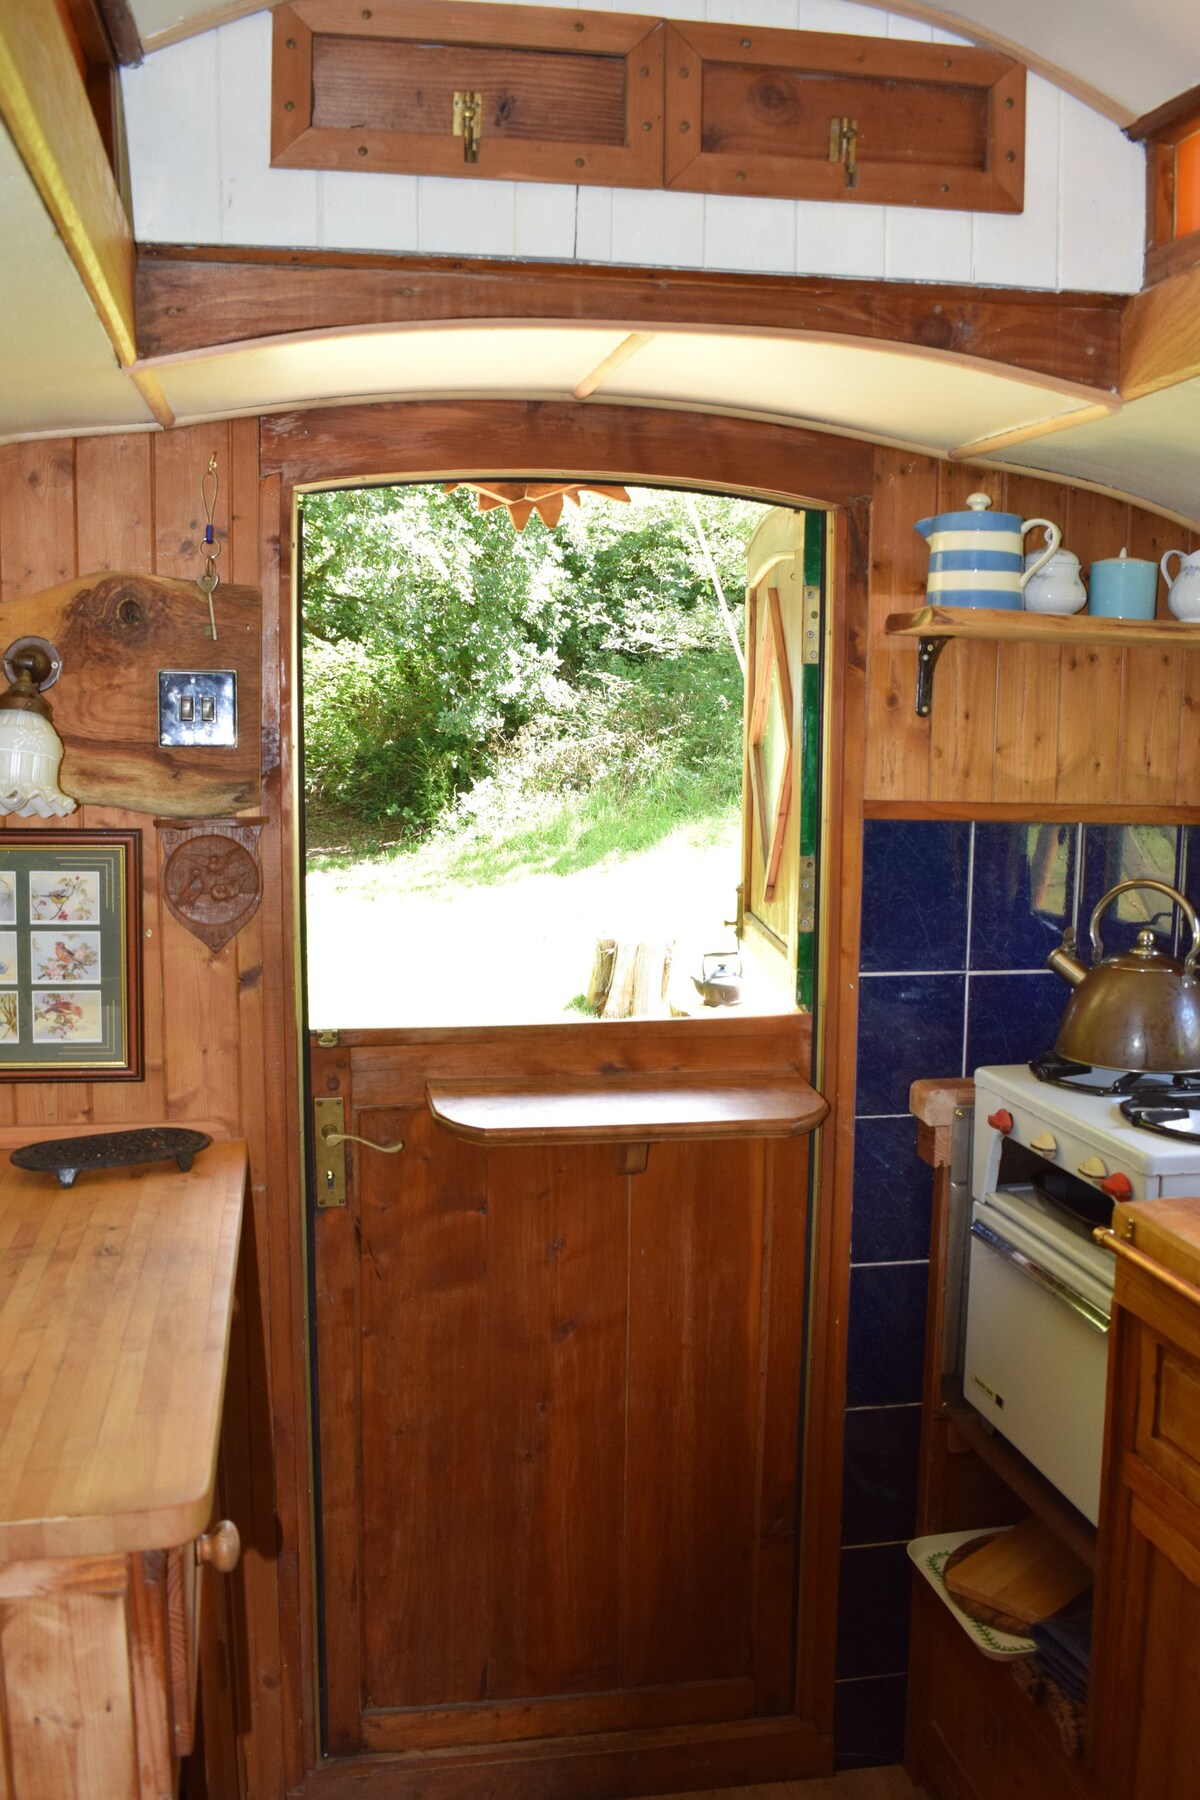 Quirky wooden showmans in pretty secluded valley